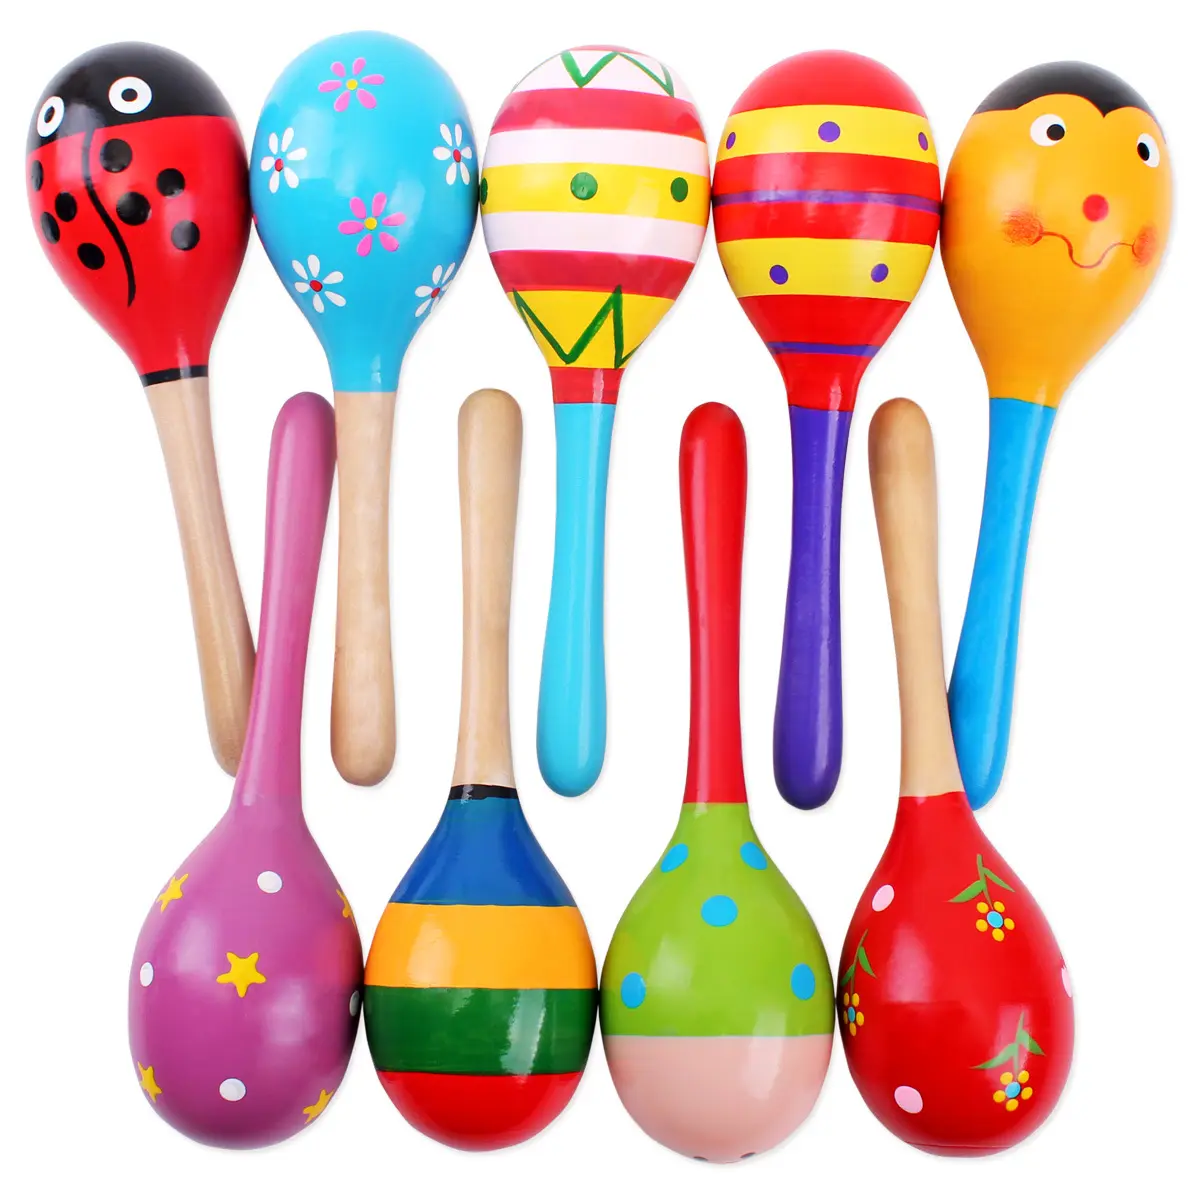 hot sale high quality bulk mini music hand mexican colorful musical instrument shake rattles sand hammer baby wooden maracas toy